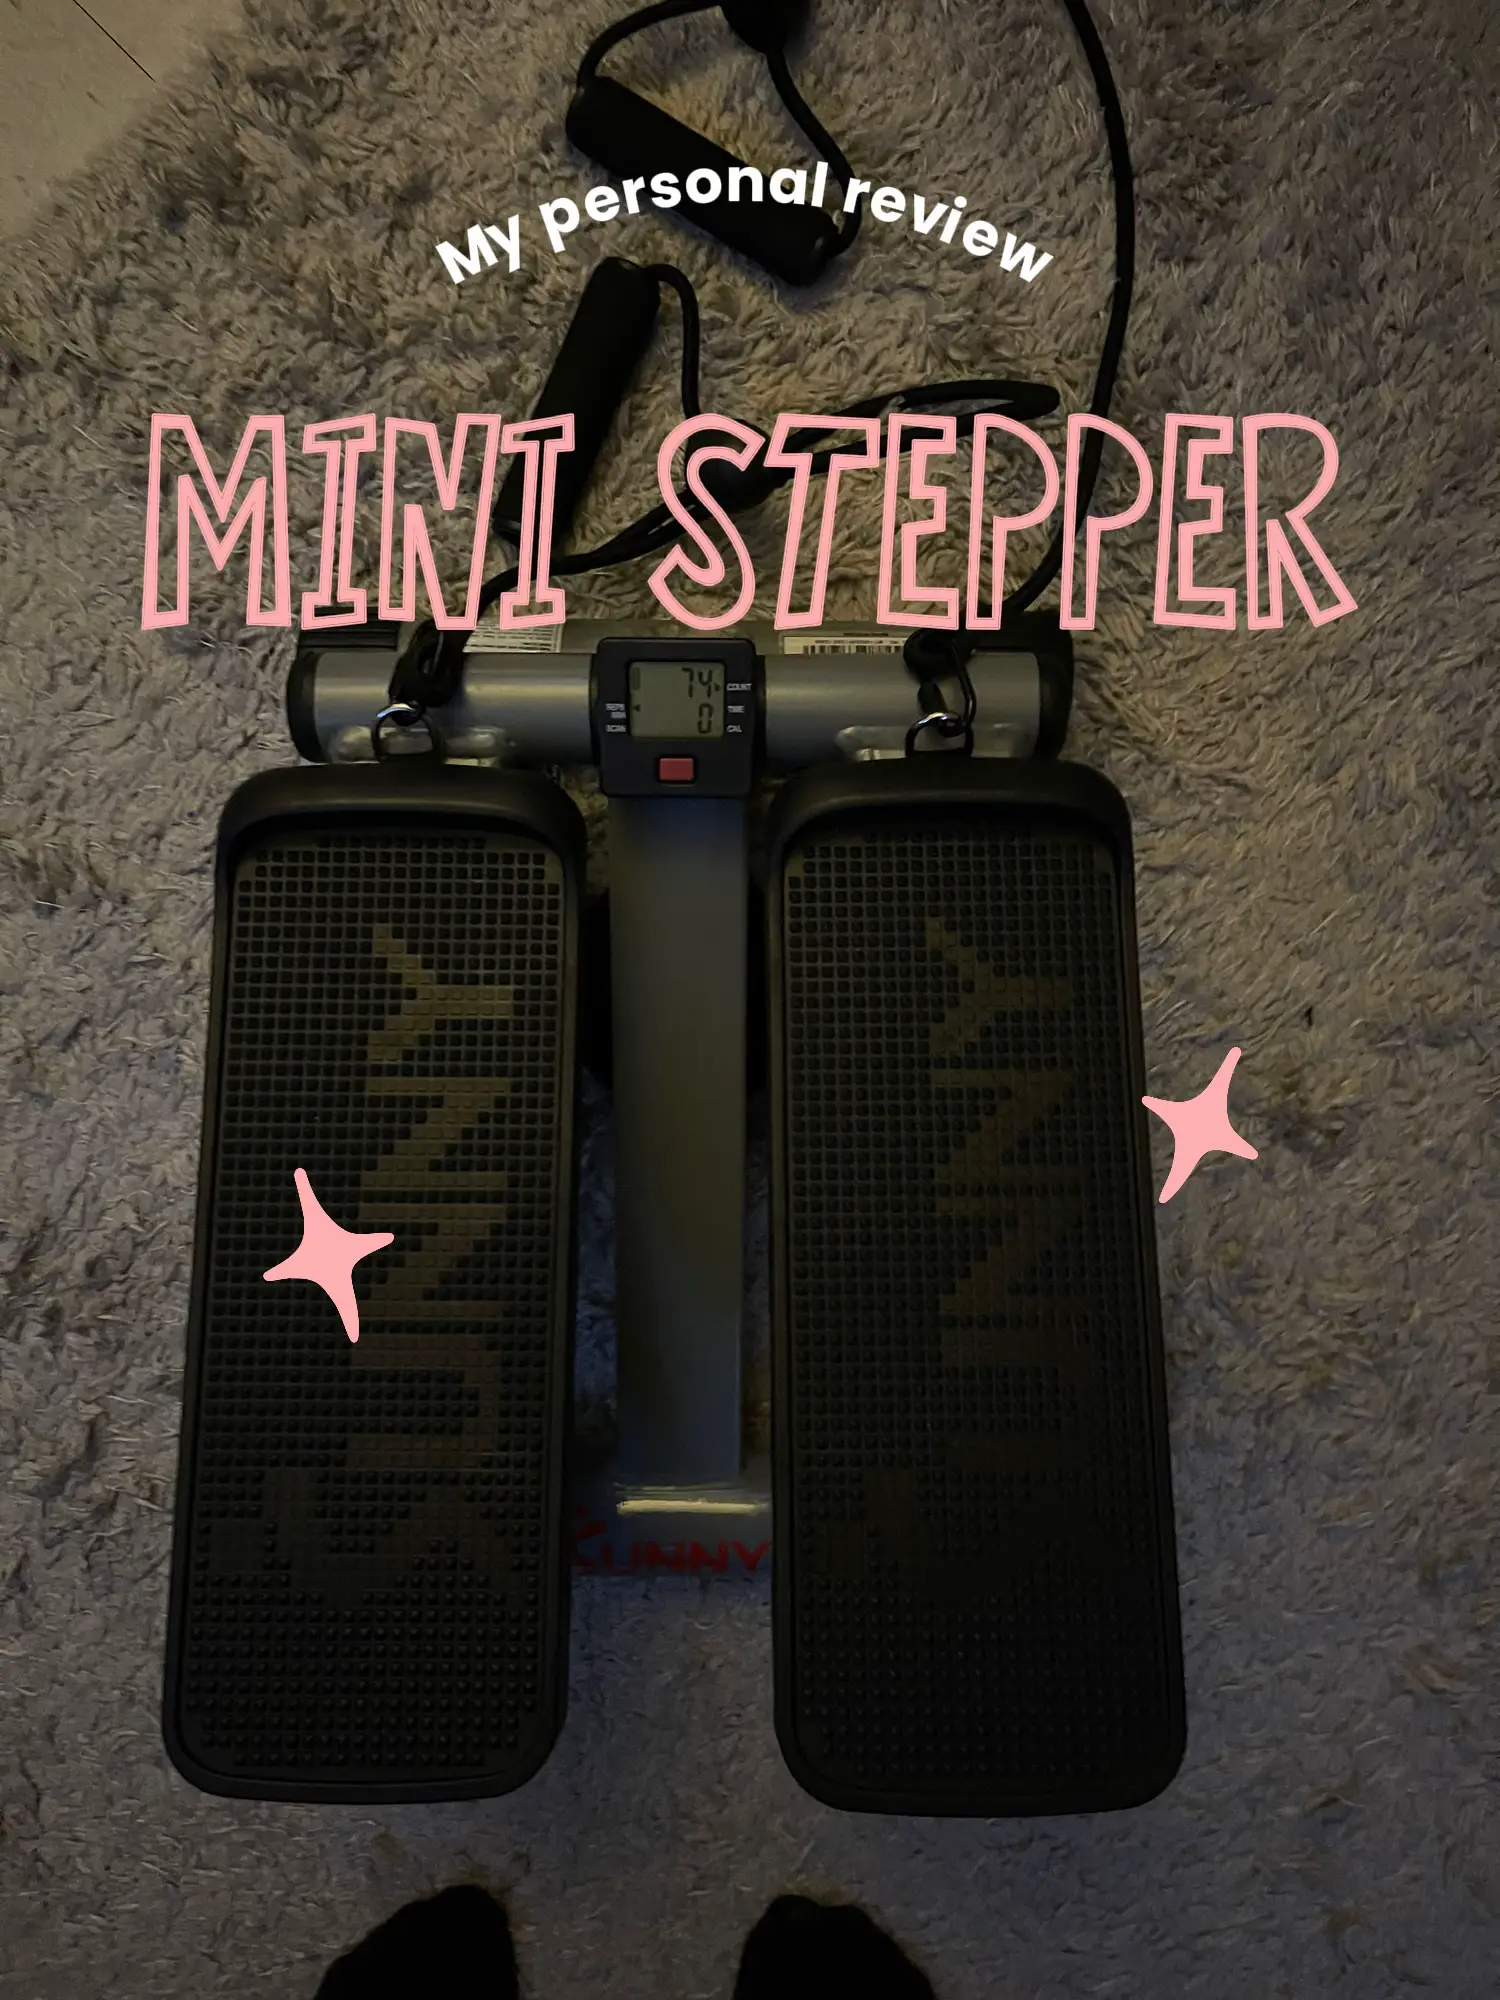 Best Mini Stepper Workouts for Fat Loss